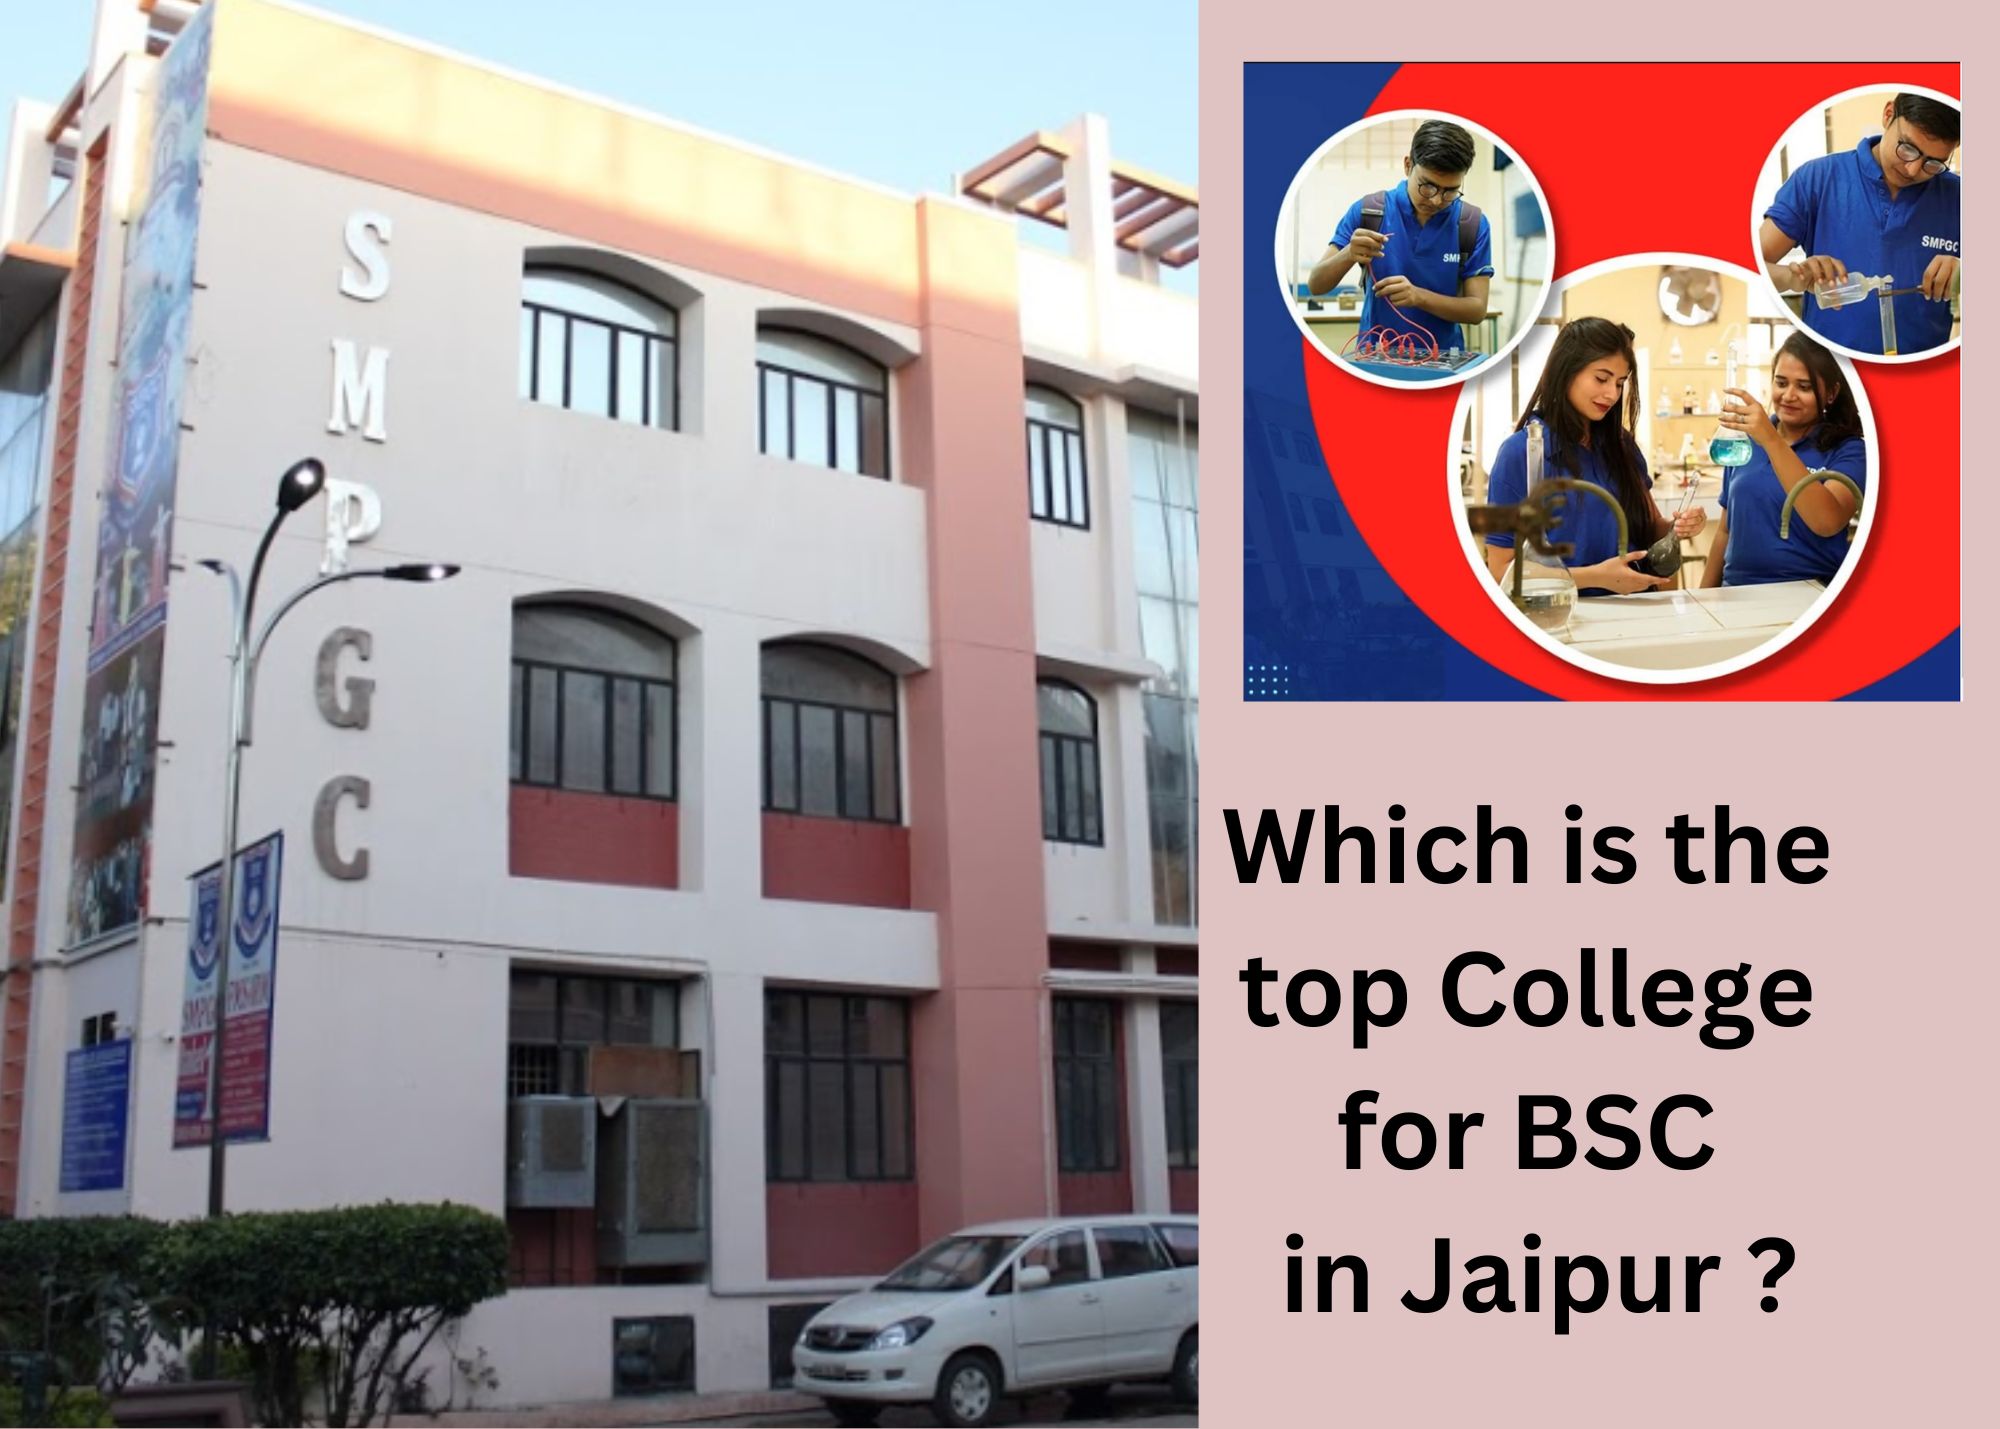 Which is the top College for BSC in Jaipur?